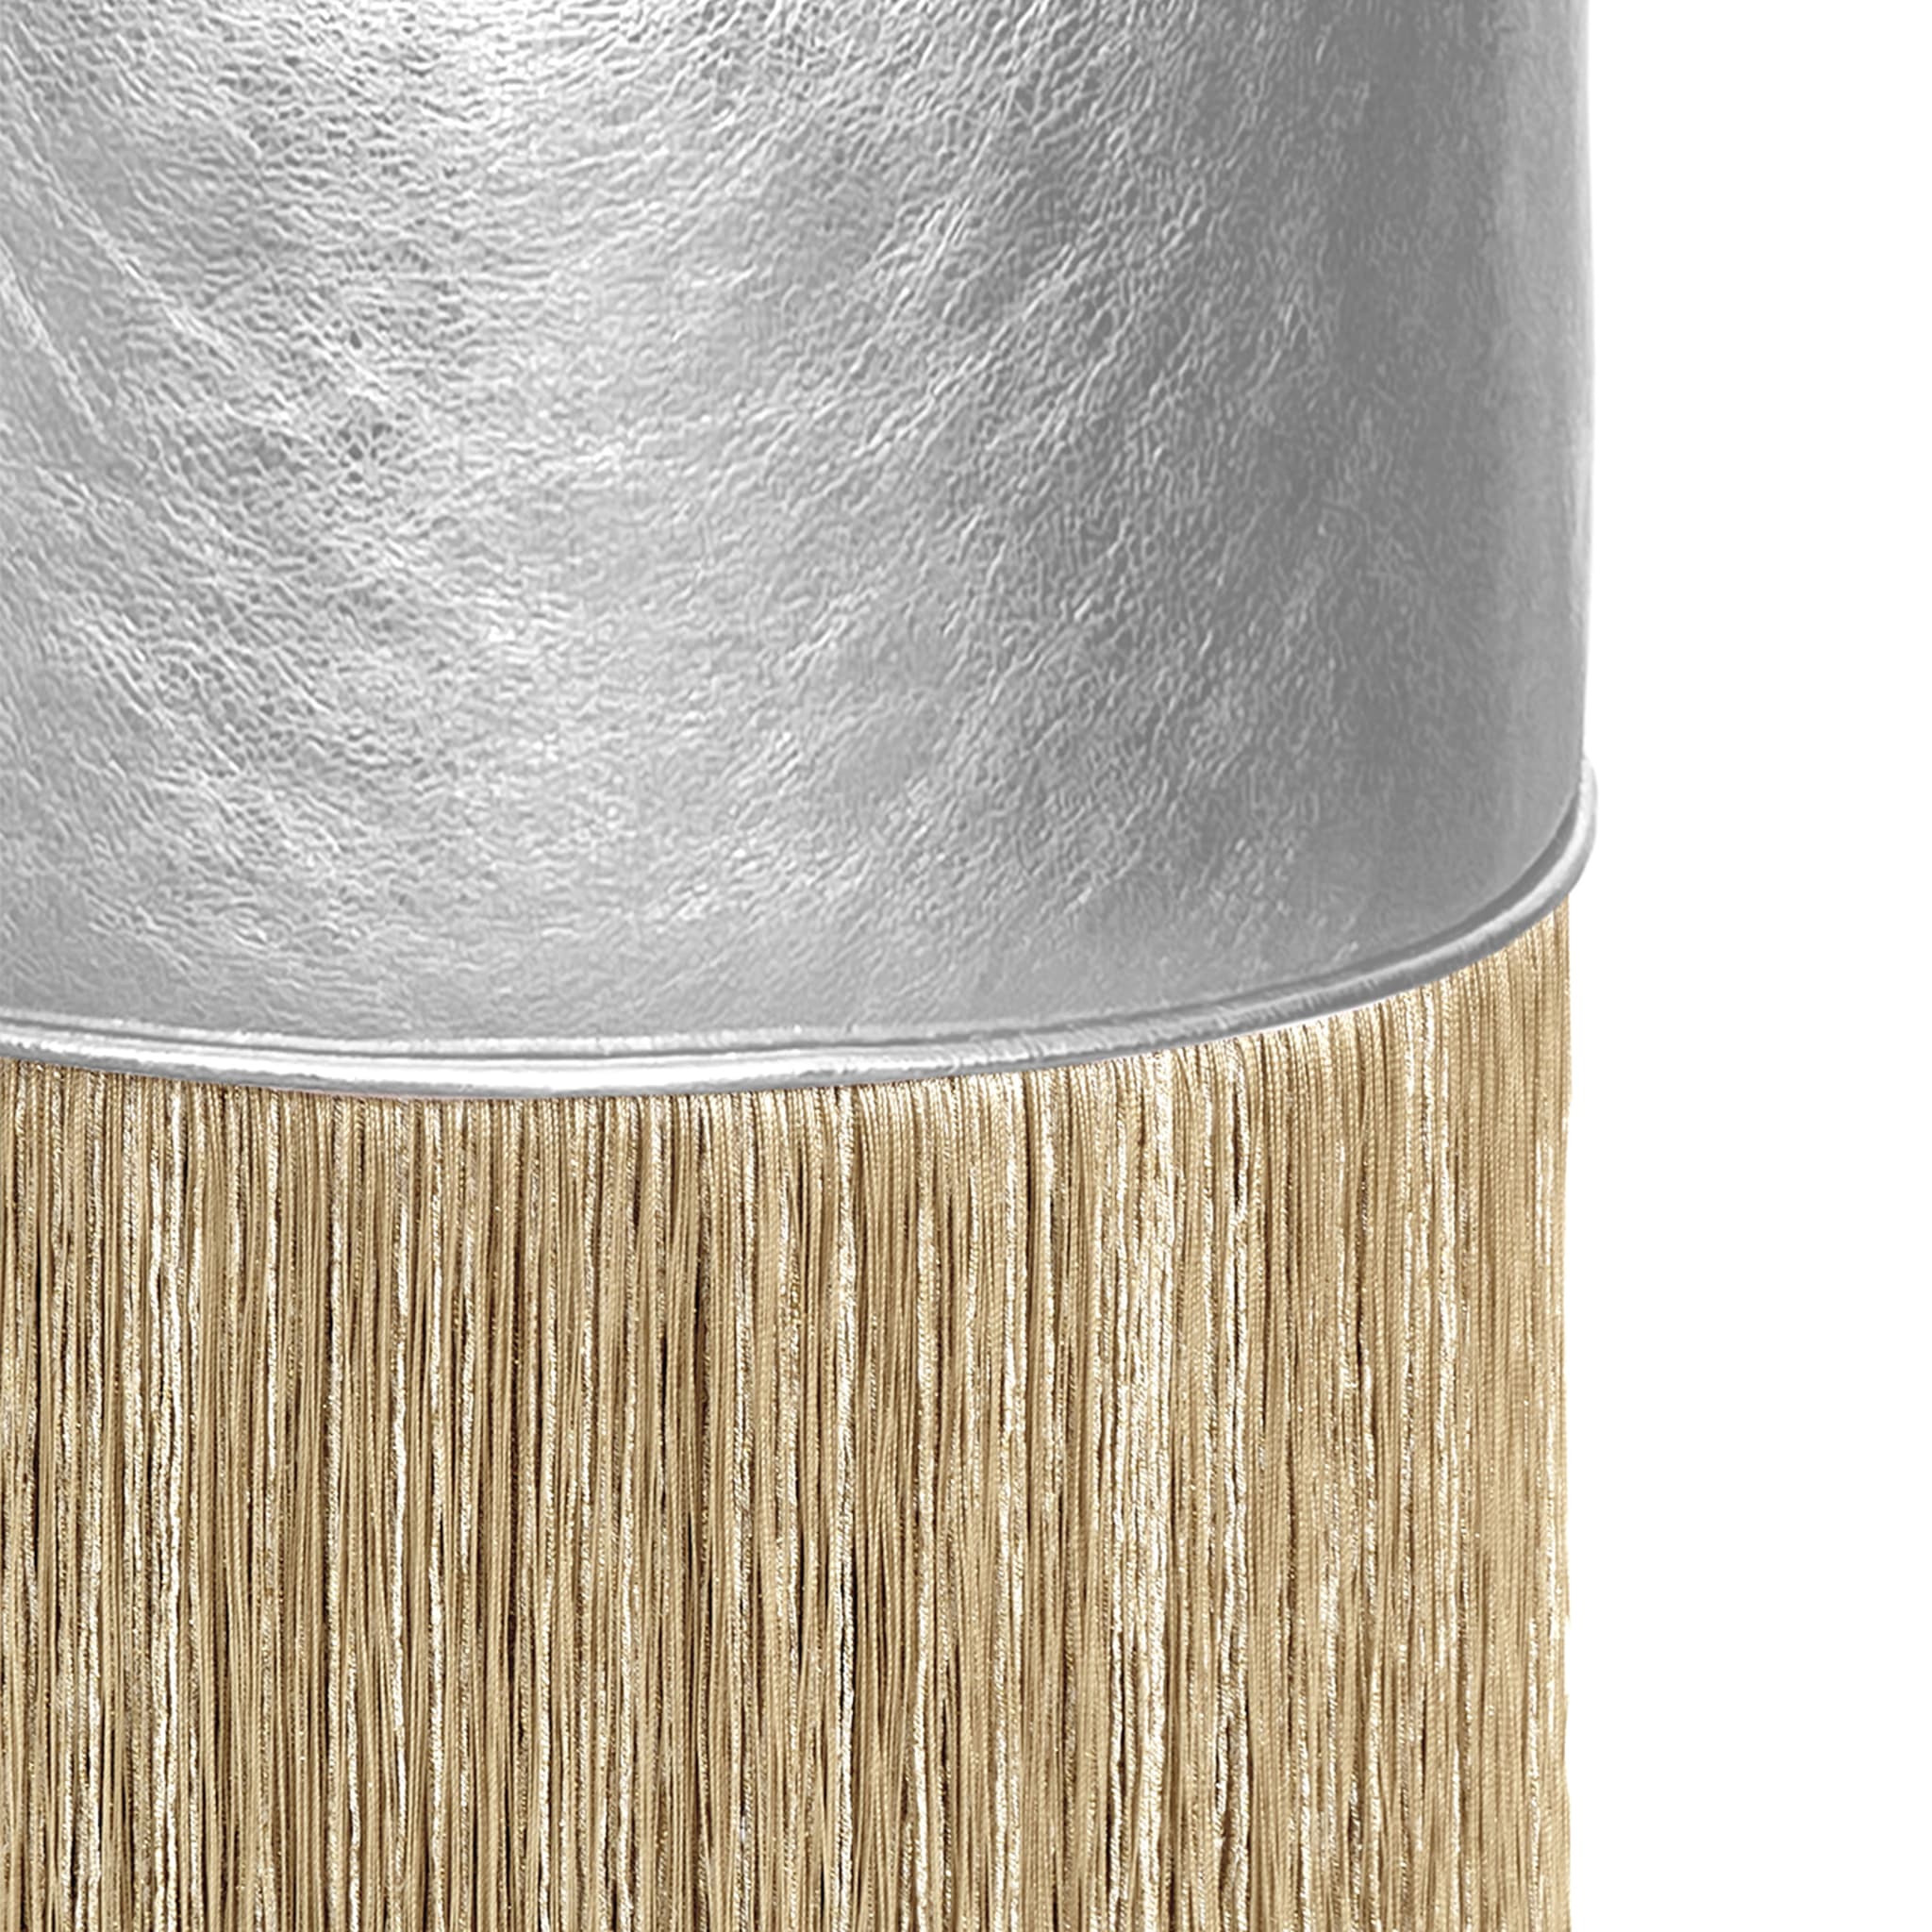 Gleaming Silver Leather Gold Fringes Pouf by Lorenza Bozzoli - Alternative view 1